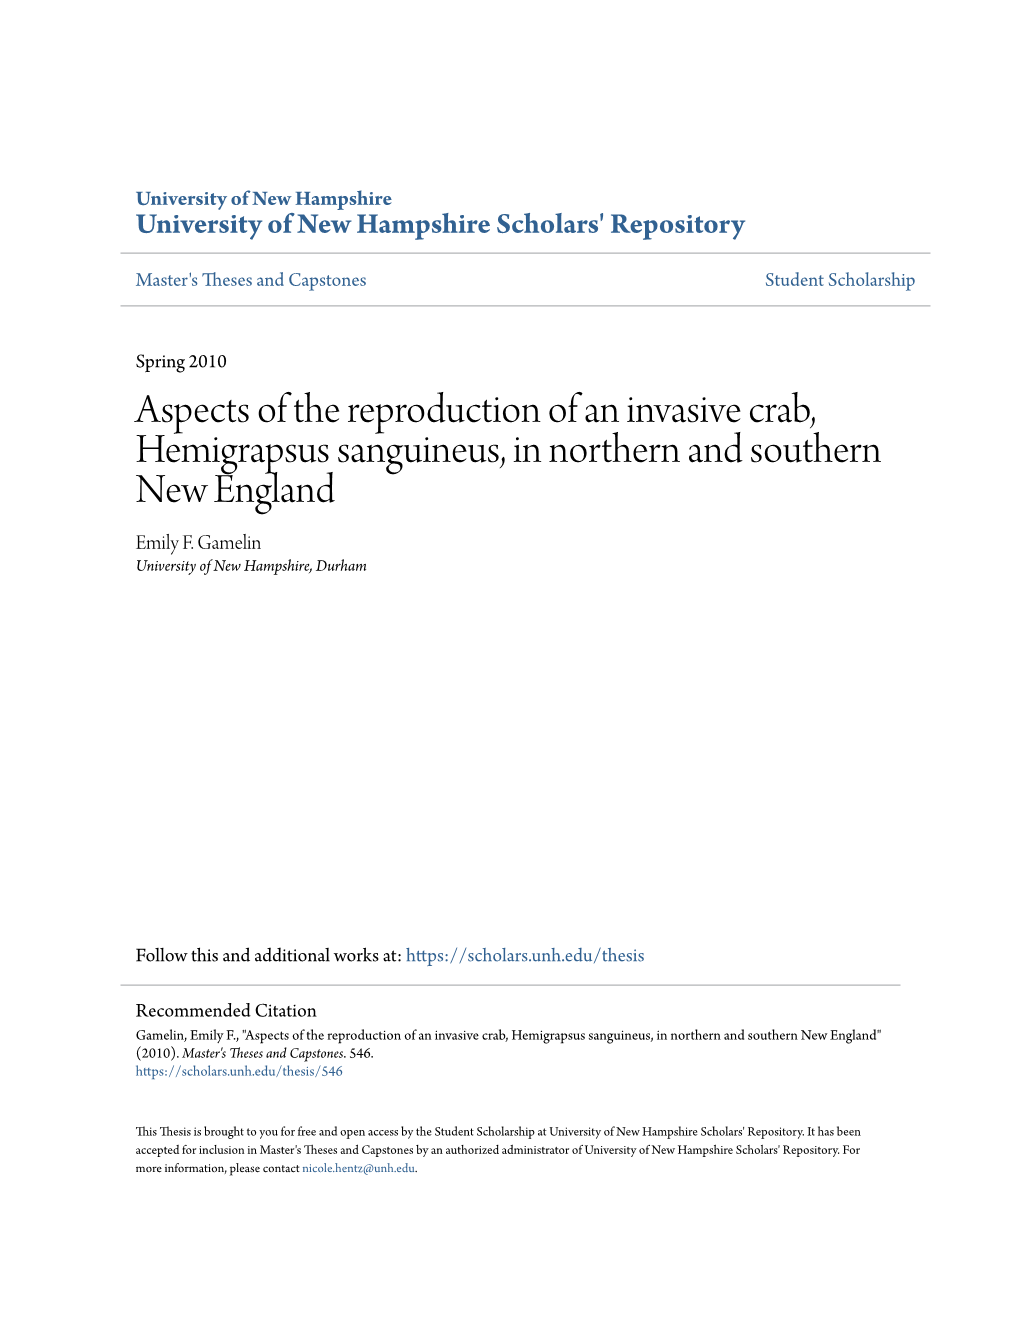 Aspects of the Reproduction of an Invasive Crab, Hemigrapsus Sanguineus, in Northern and Southern New England Emily F